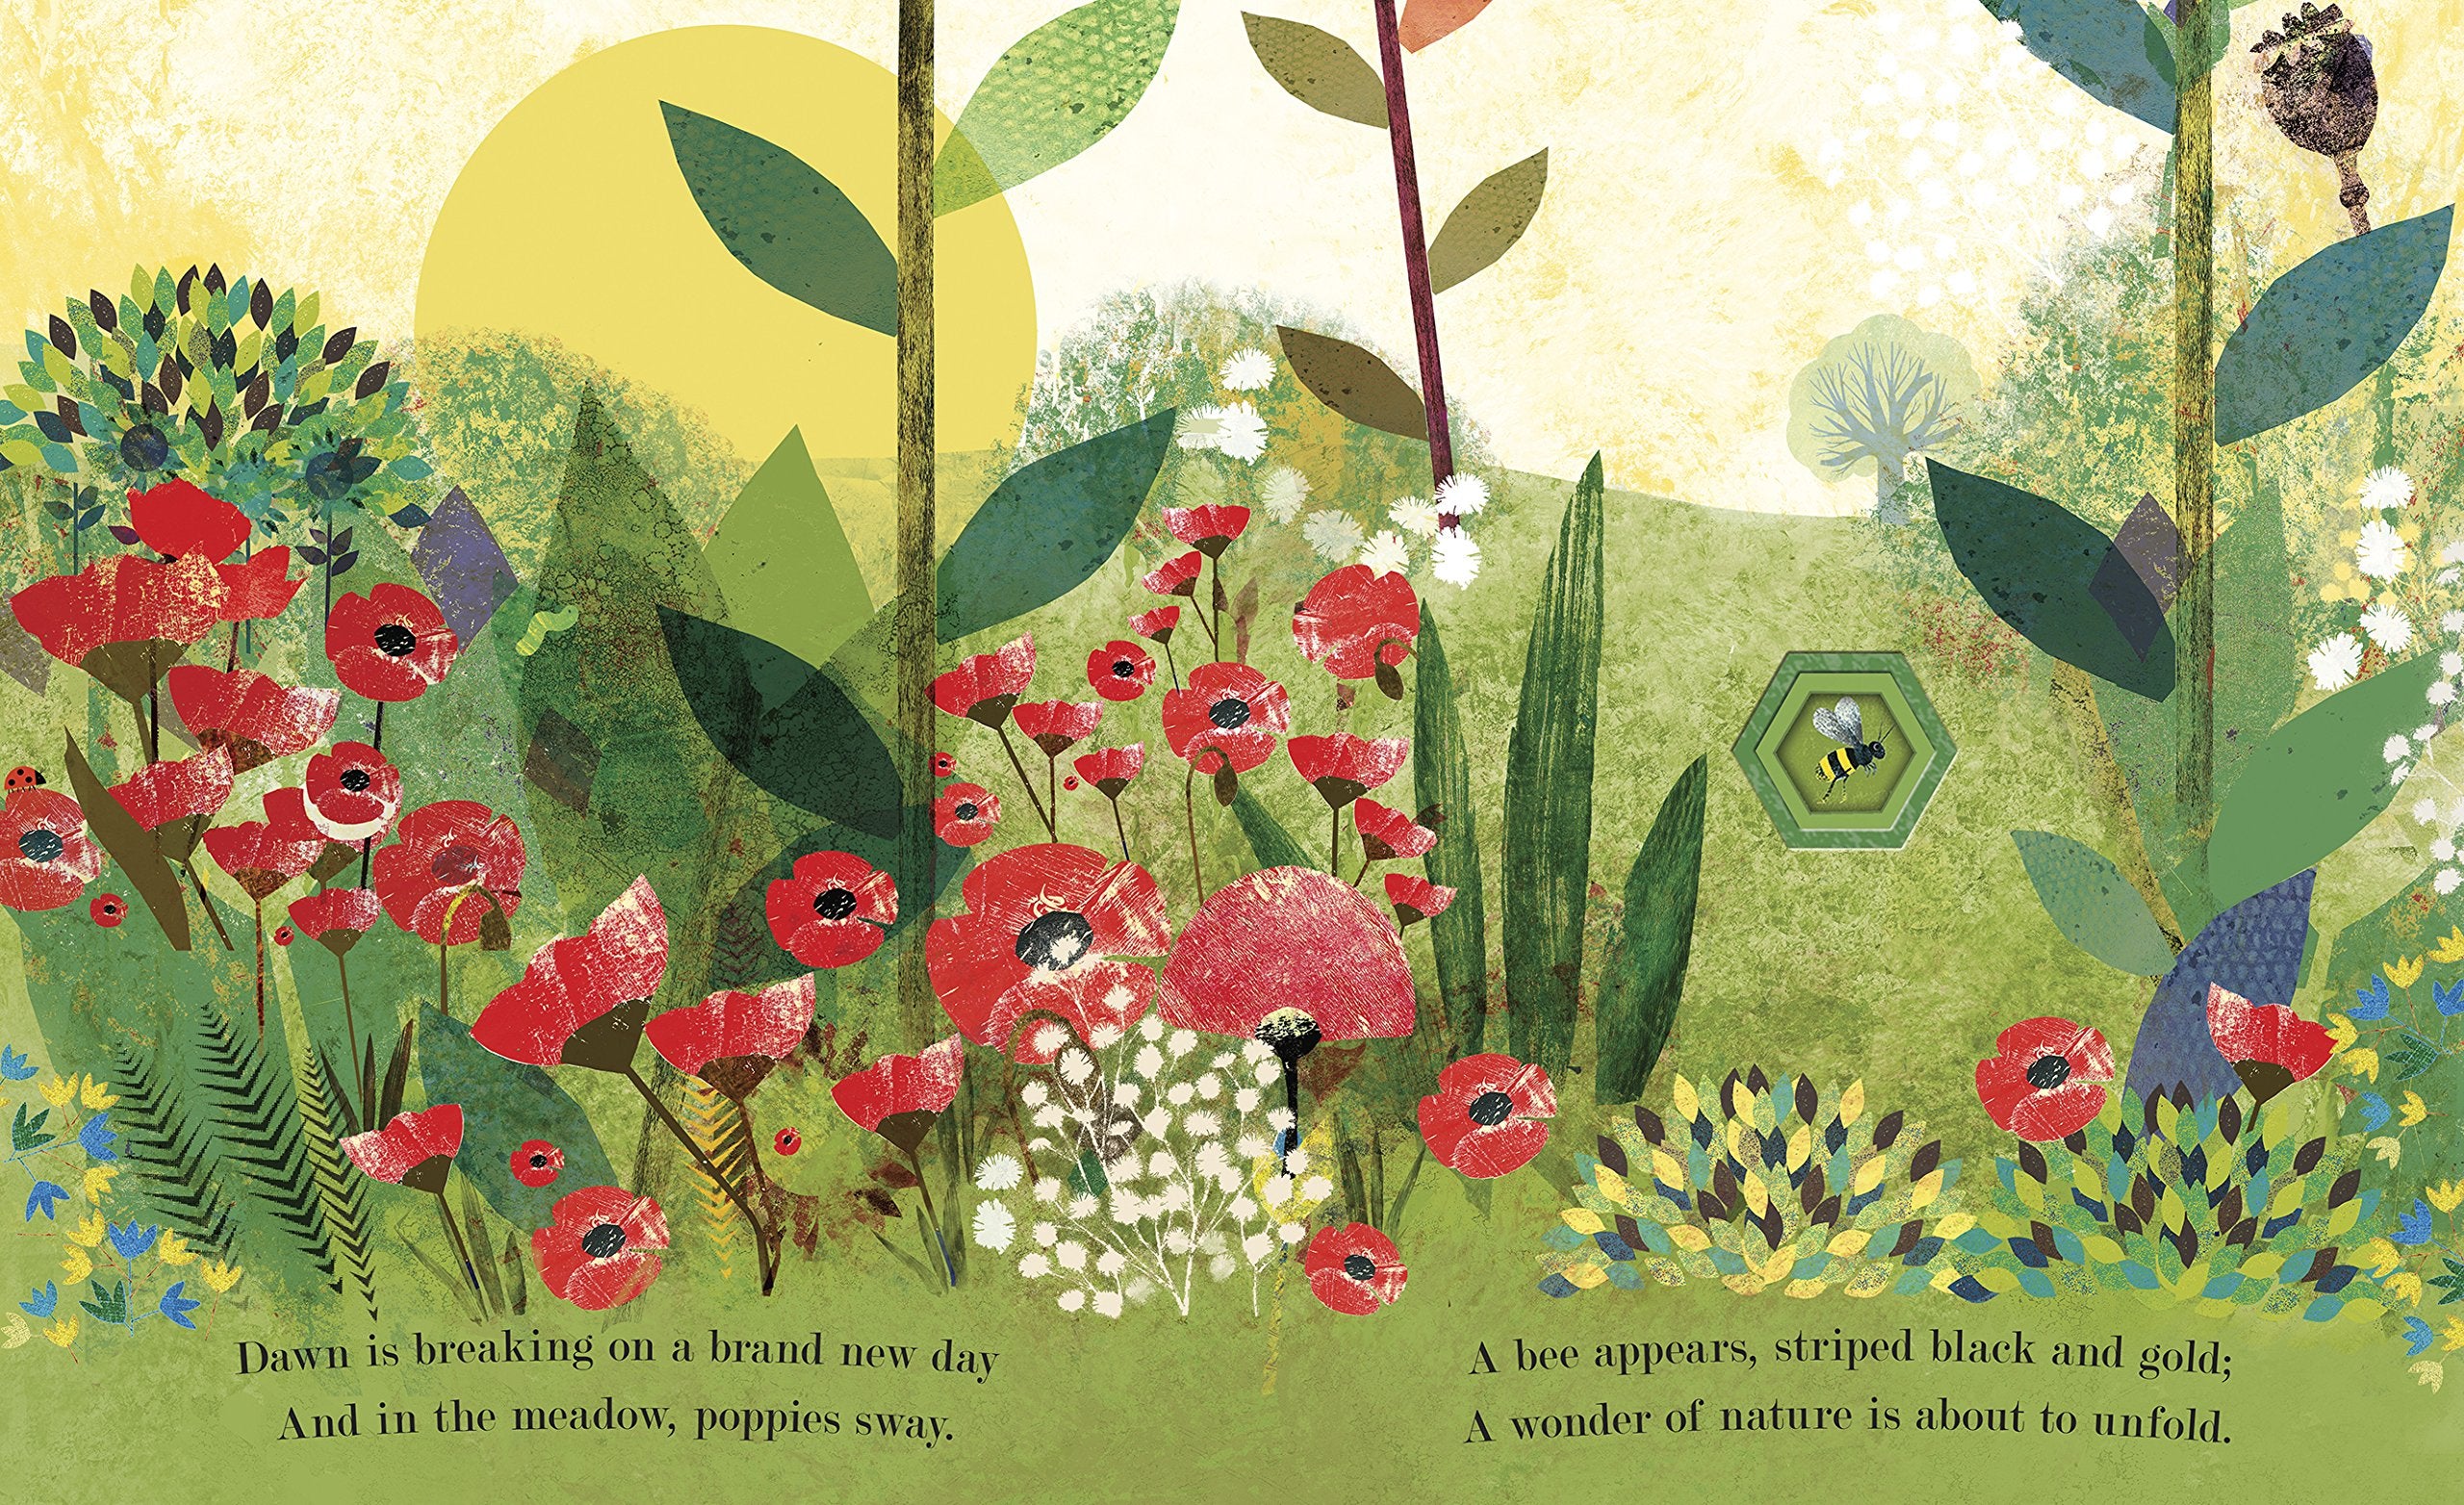 Bee - A Peek-through Picture Book